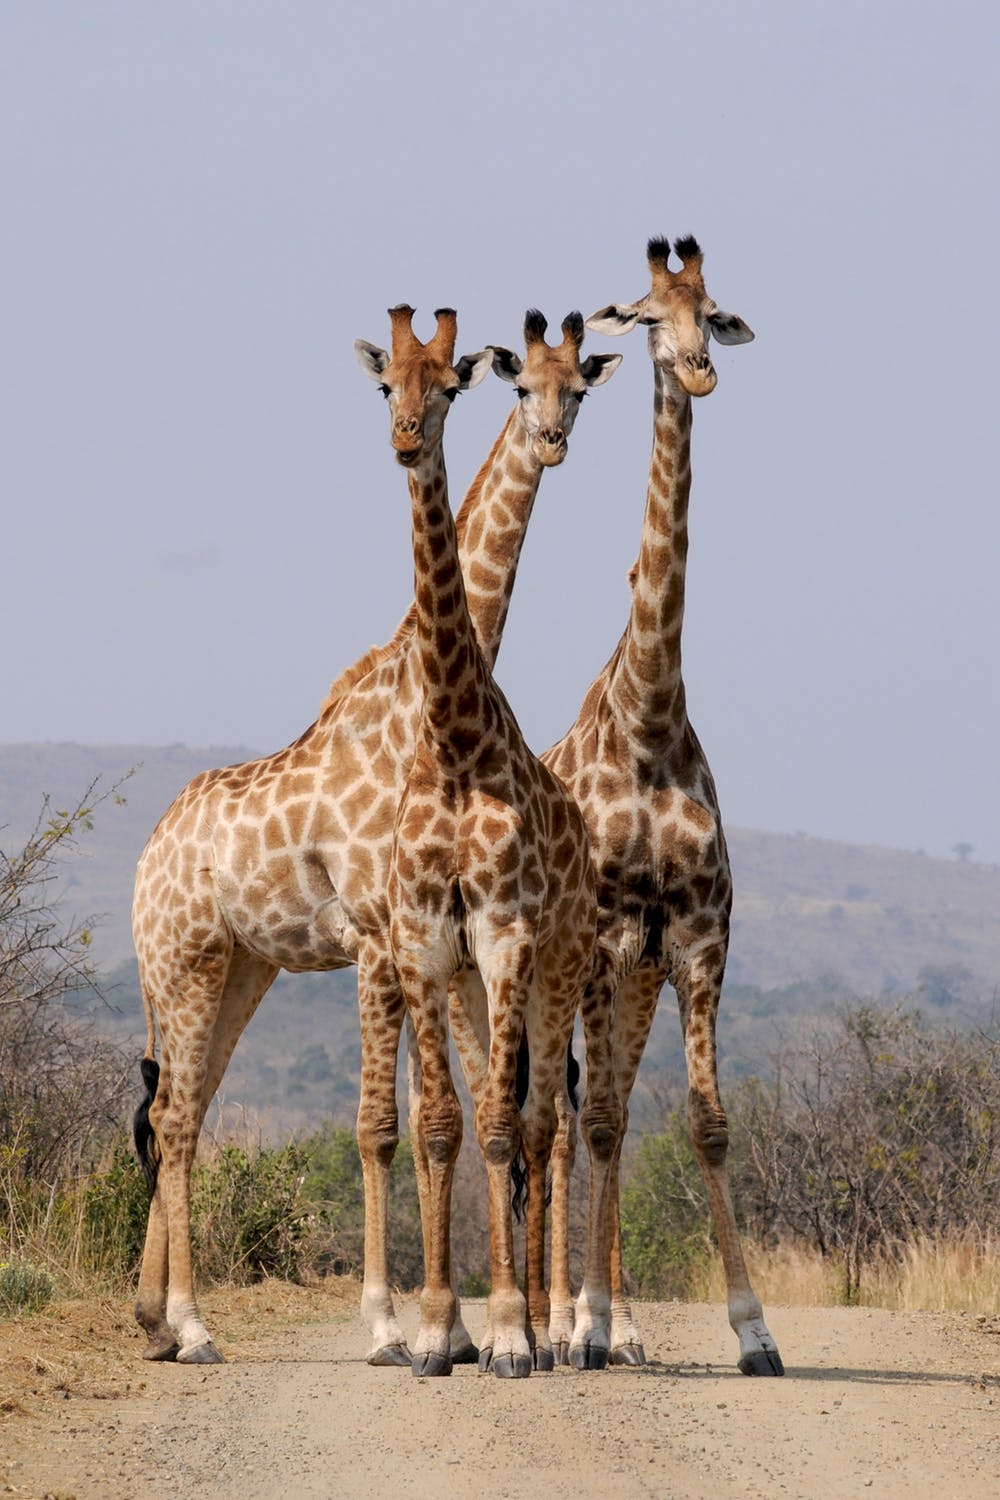 What is the meaning of tower of giraffes?